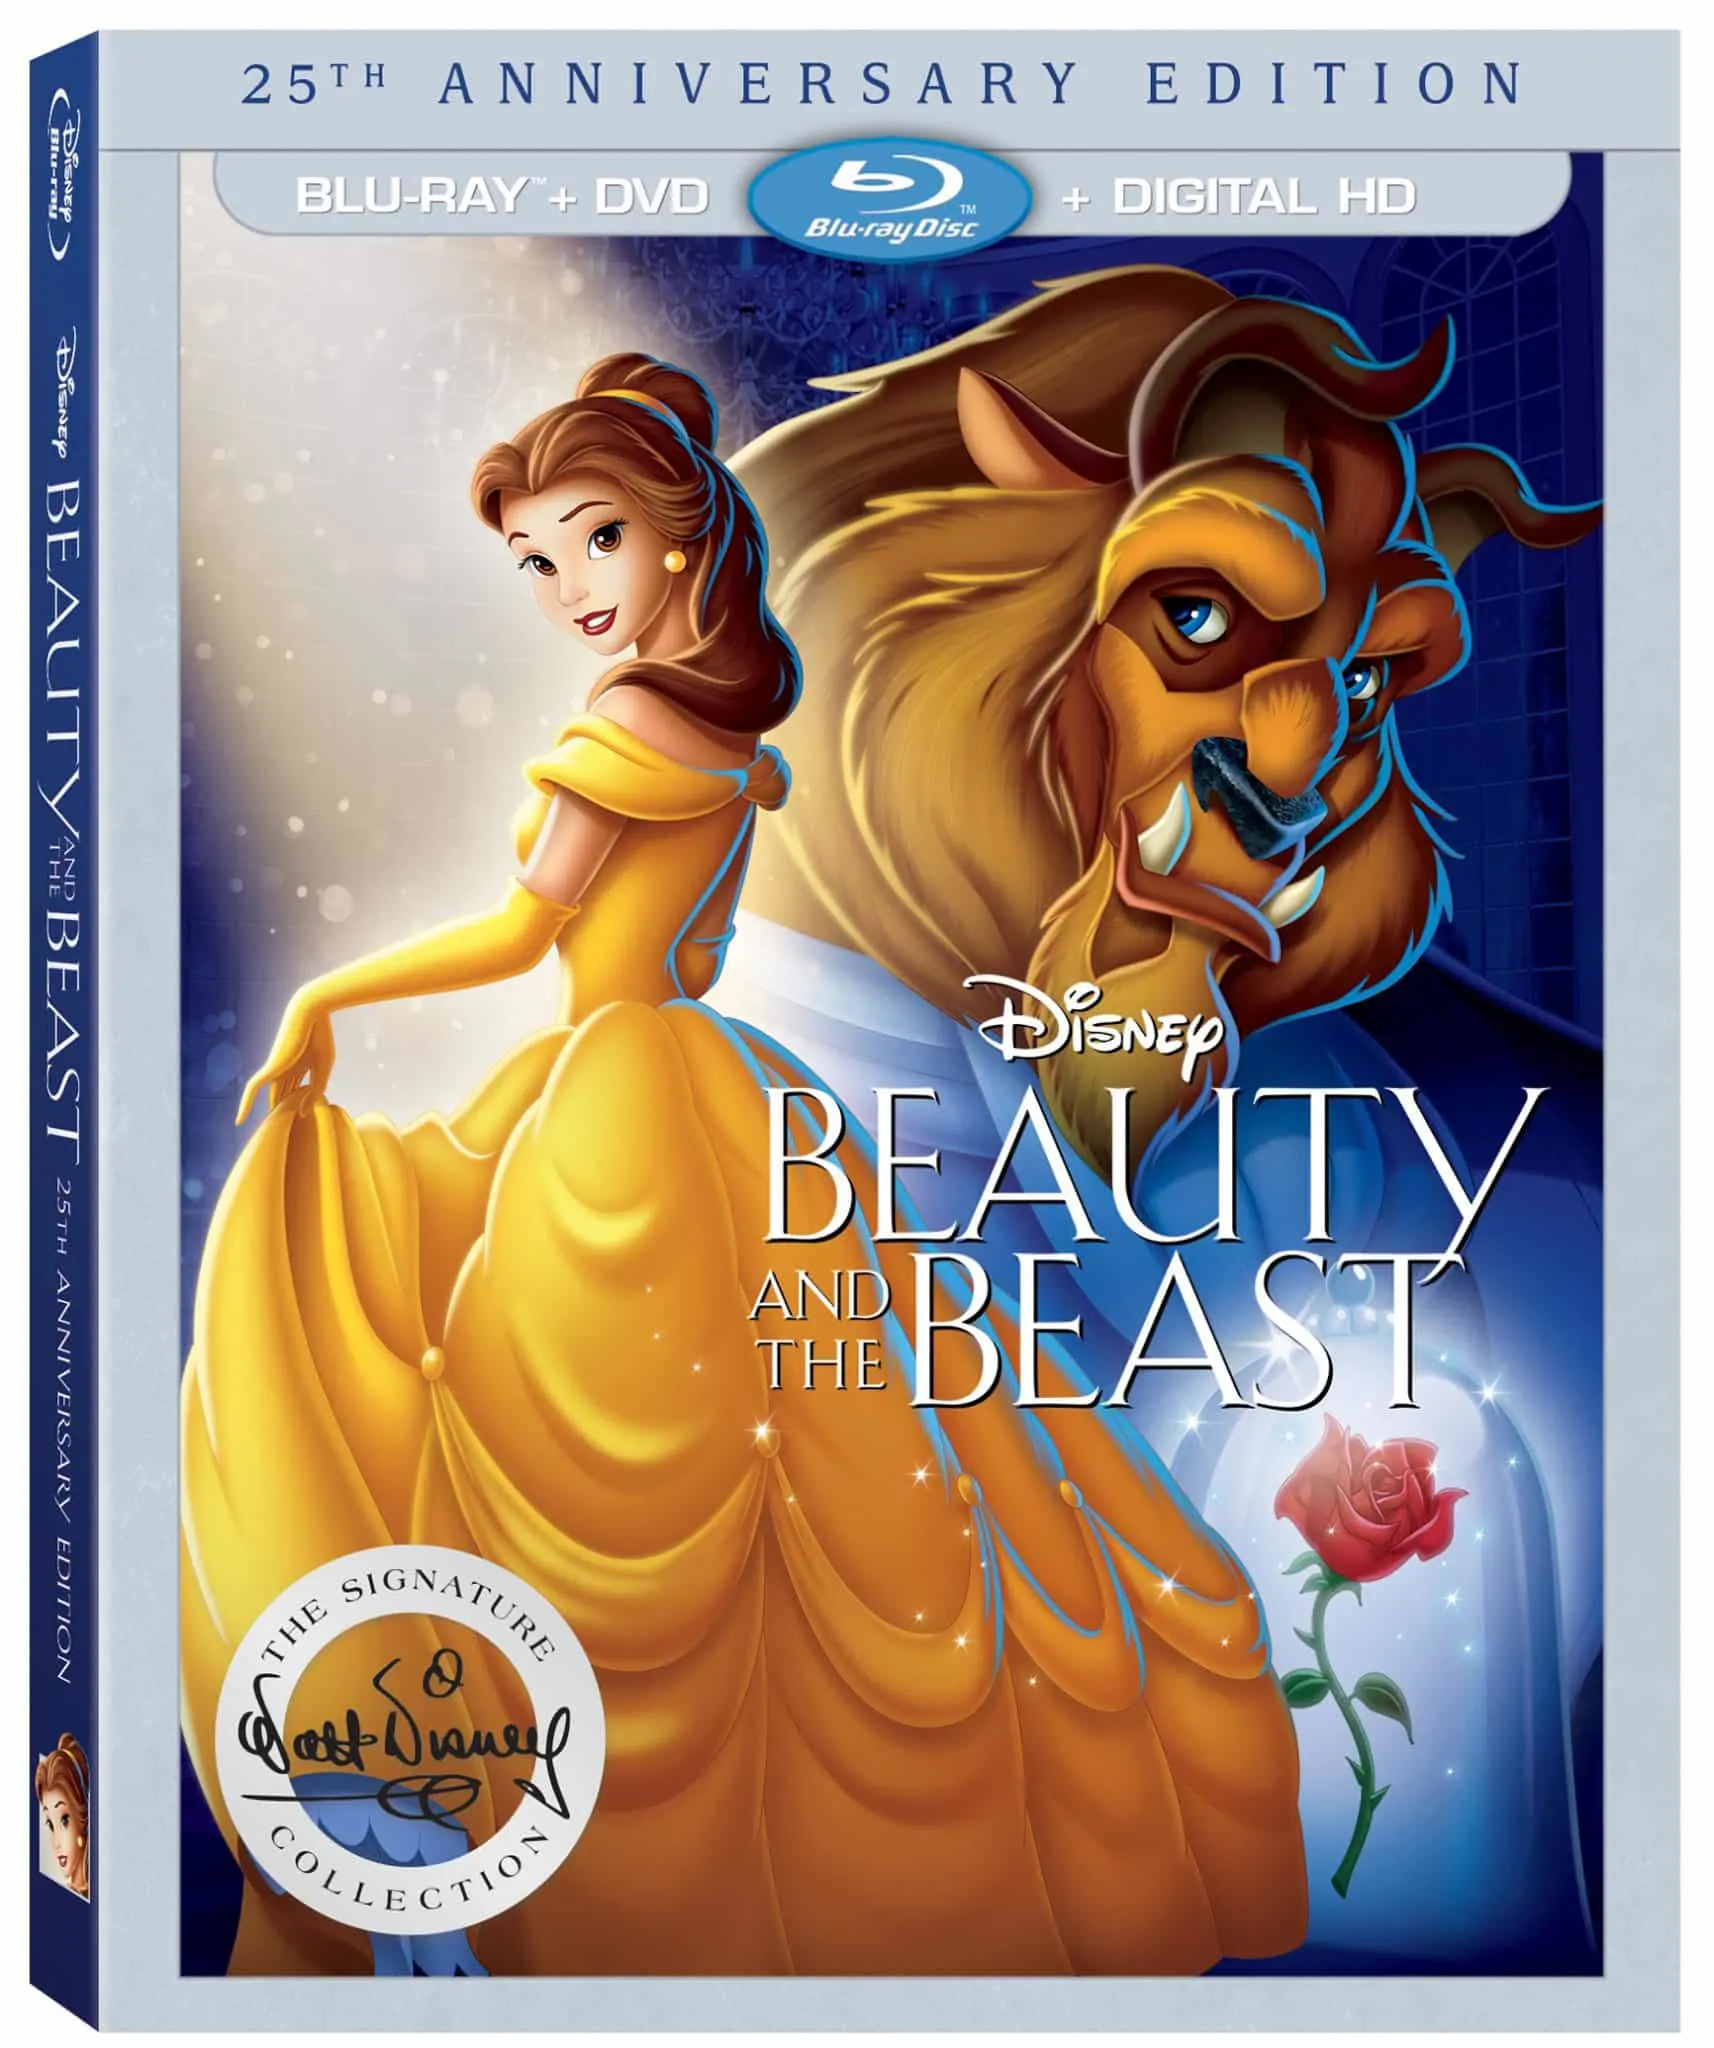 Beauty and The Beast on DVD Sept 20 | ThisNThatwithOlivia.com #BeautyAndTheBeast